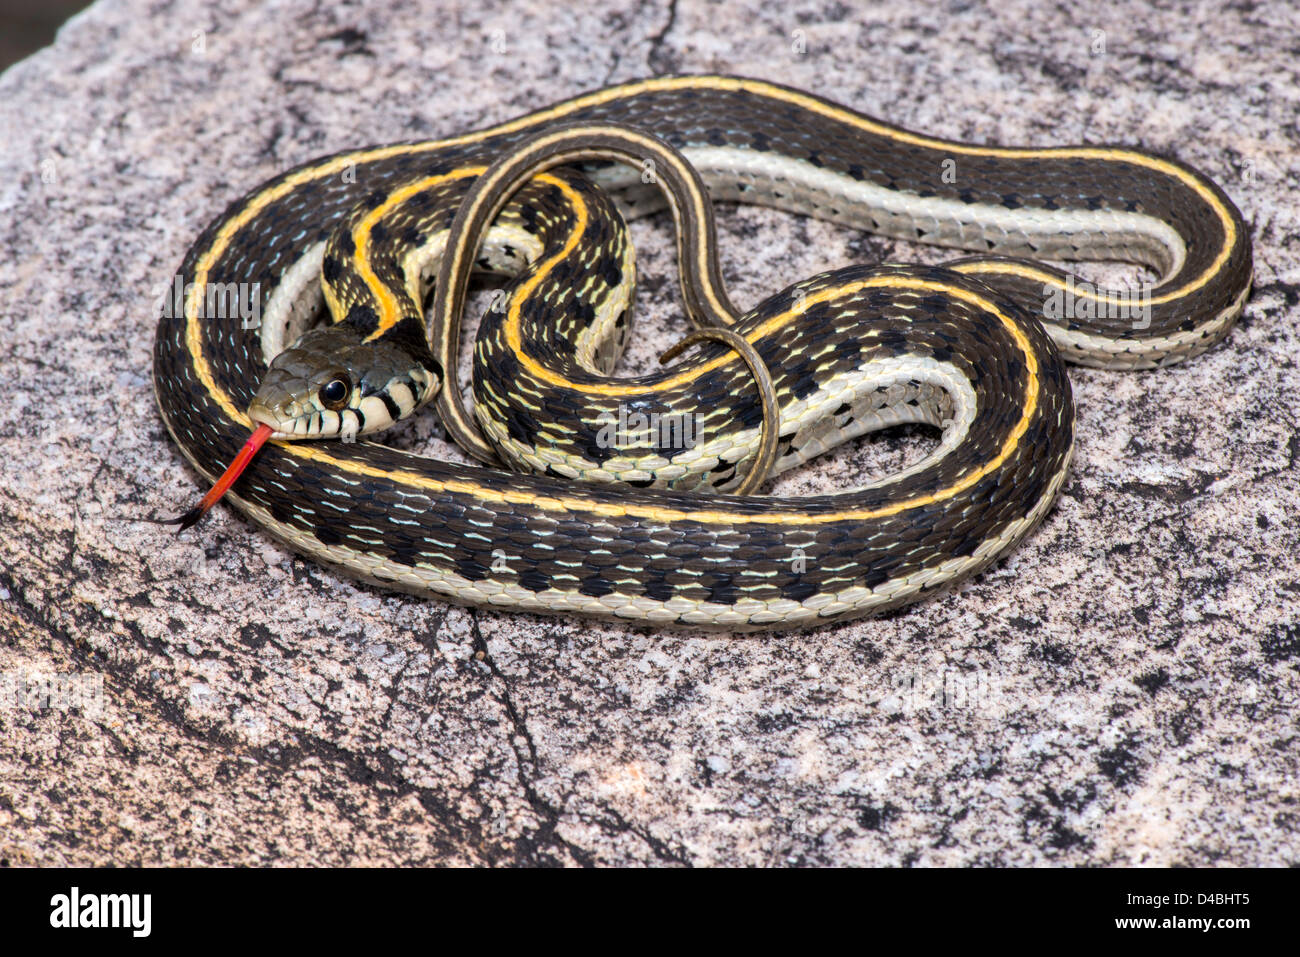 Black-necked Couleuvre rayée Thamnophis cyrtopsis Cochise Stronghold, Dragoon Mountains, Arizona, United States 3 Septembre Banque D'Images